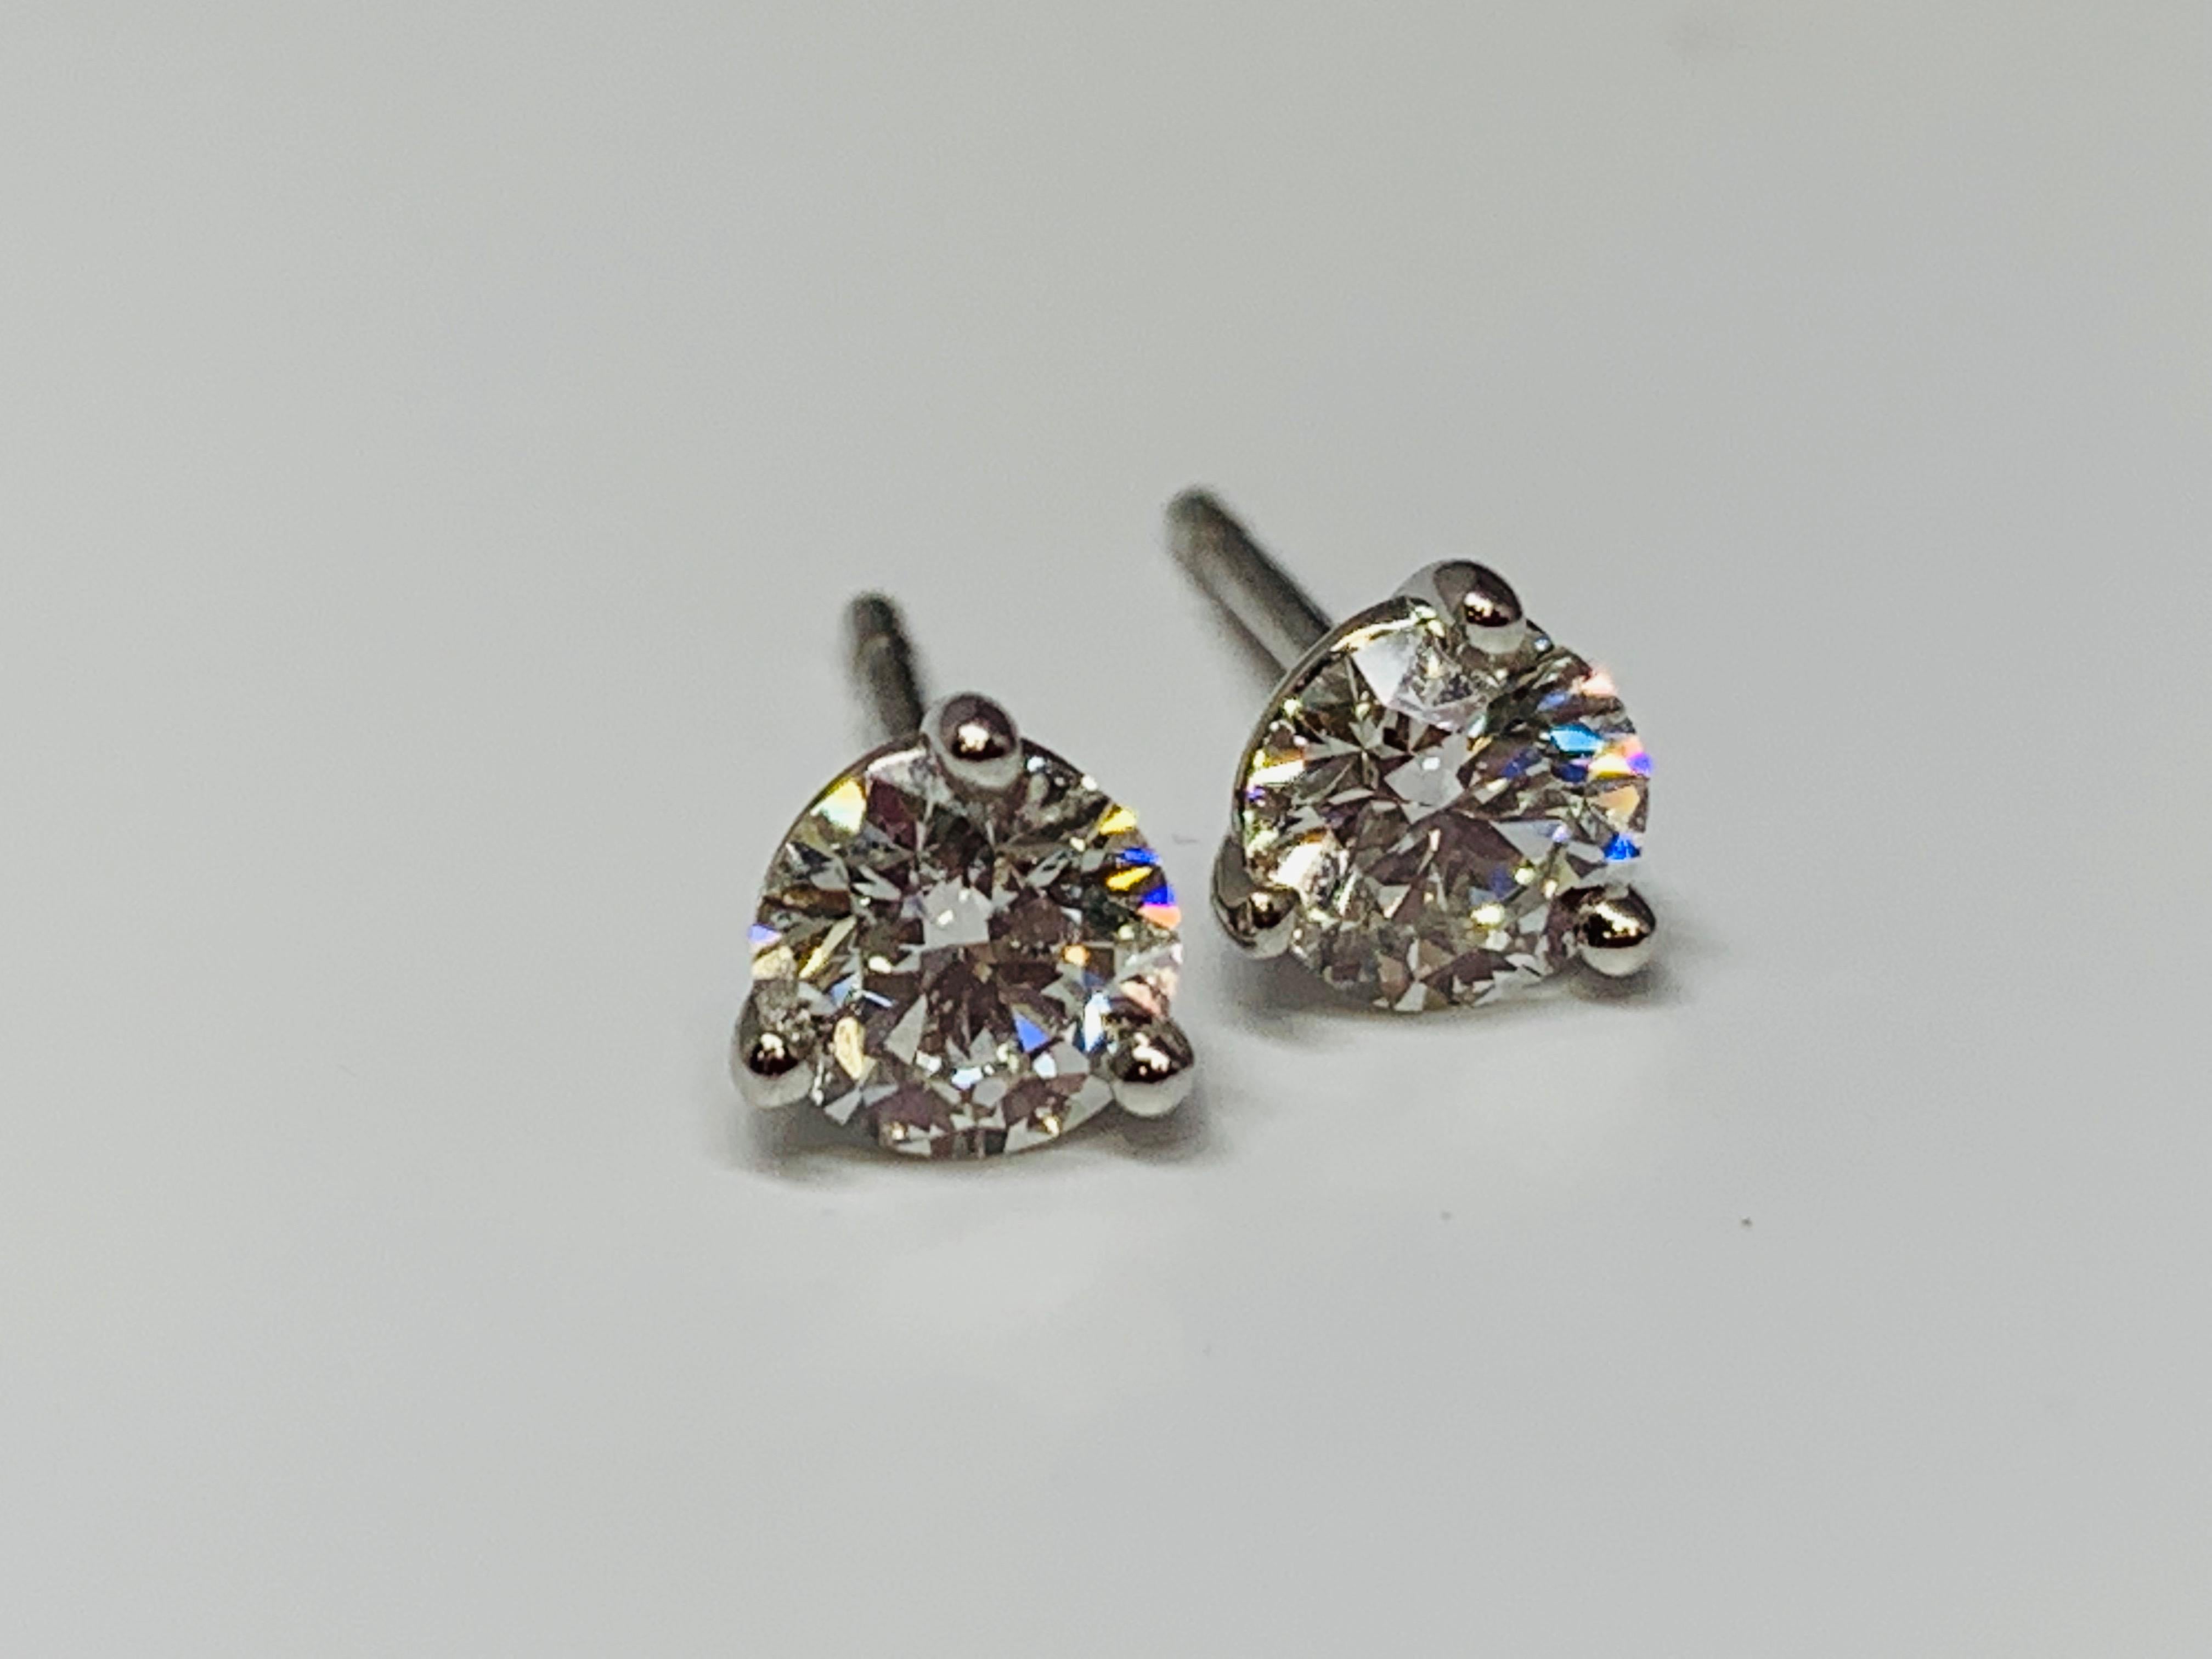 These classic 3-prong martini style stud earrings are the perfect everyday accessory. The 18K white gold mountings hold a 0.51 carat round diamond each. The quality of the stones are approximately G-H/VS-SI. Hearts On Fire diamonds are the world's